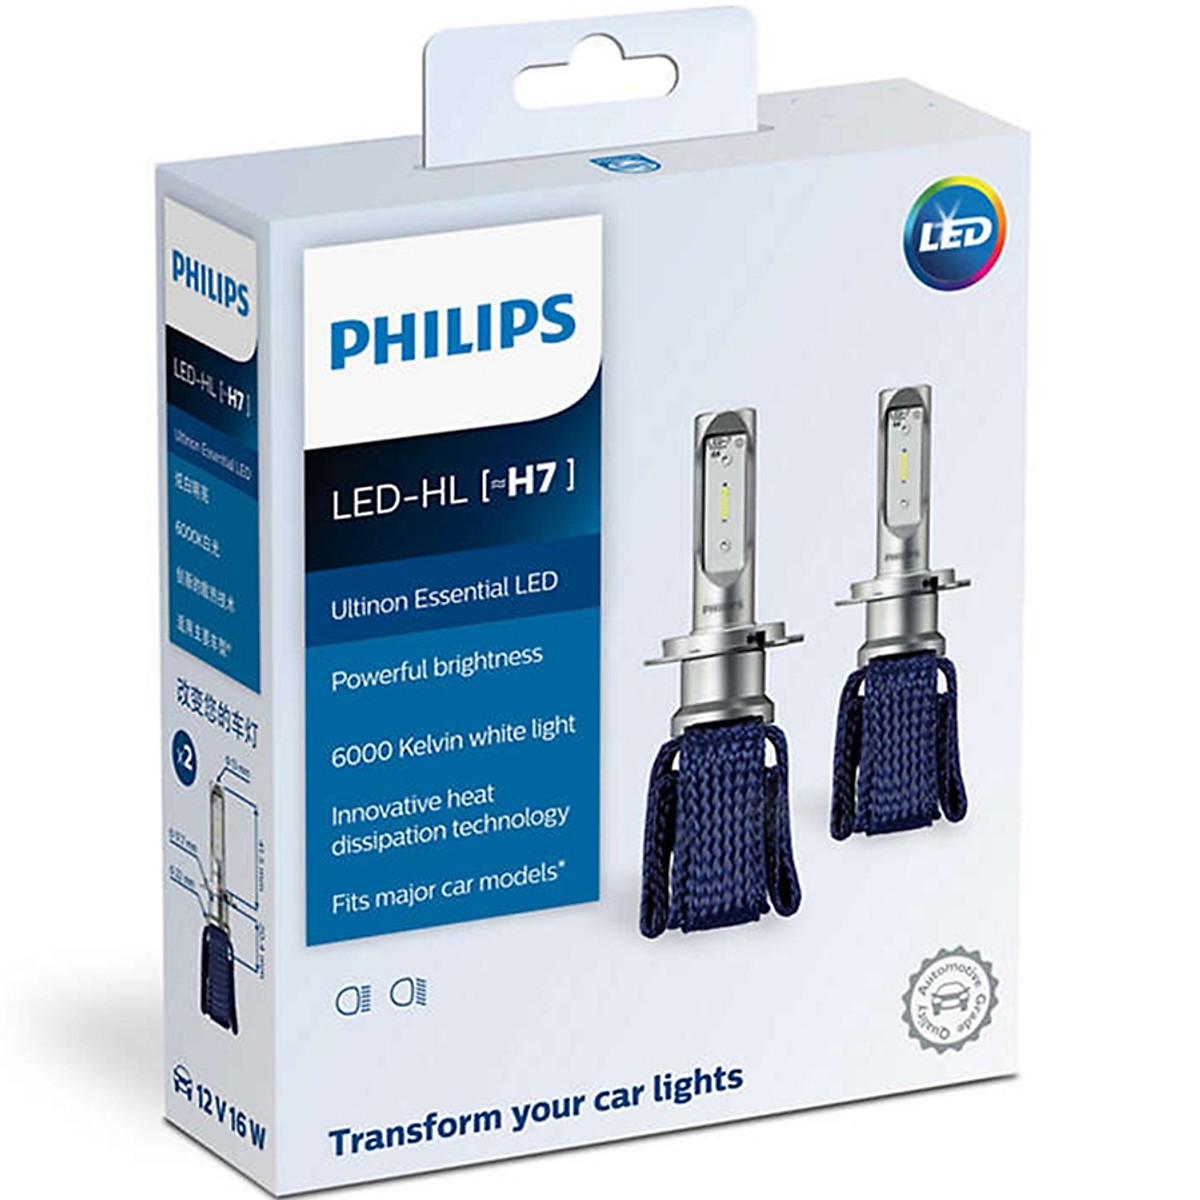 LED PHILIPS H7 ULTINON ESSENTIAL